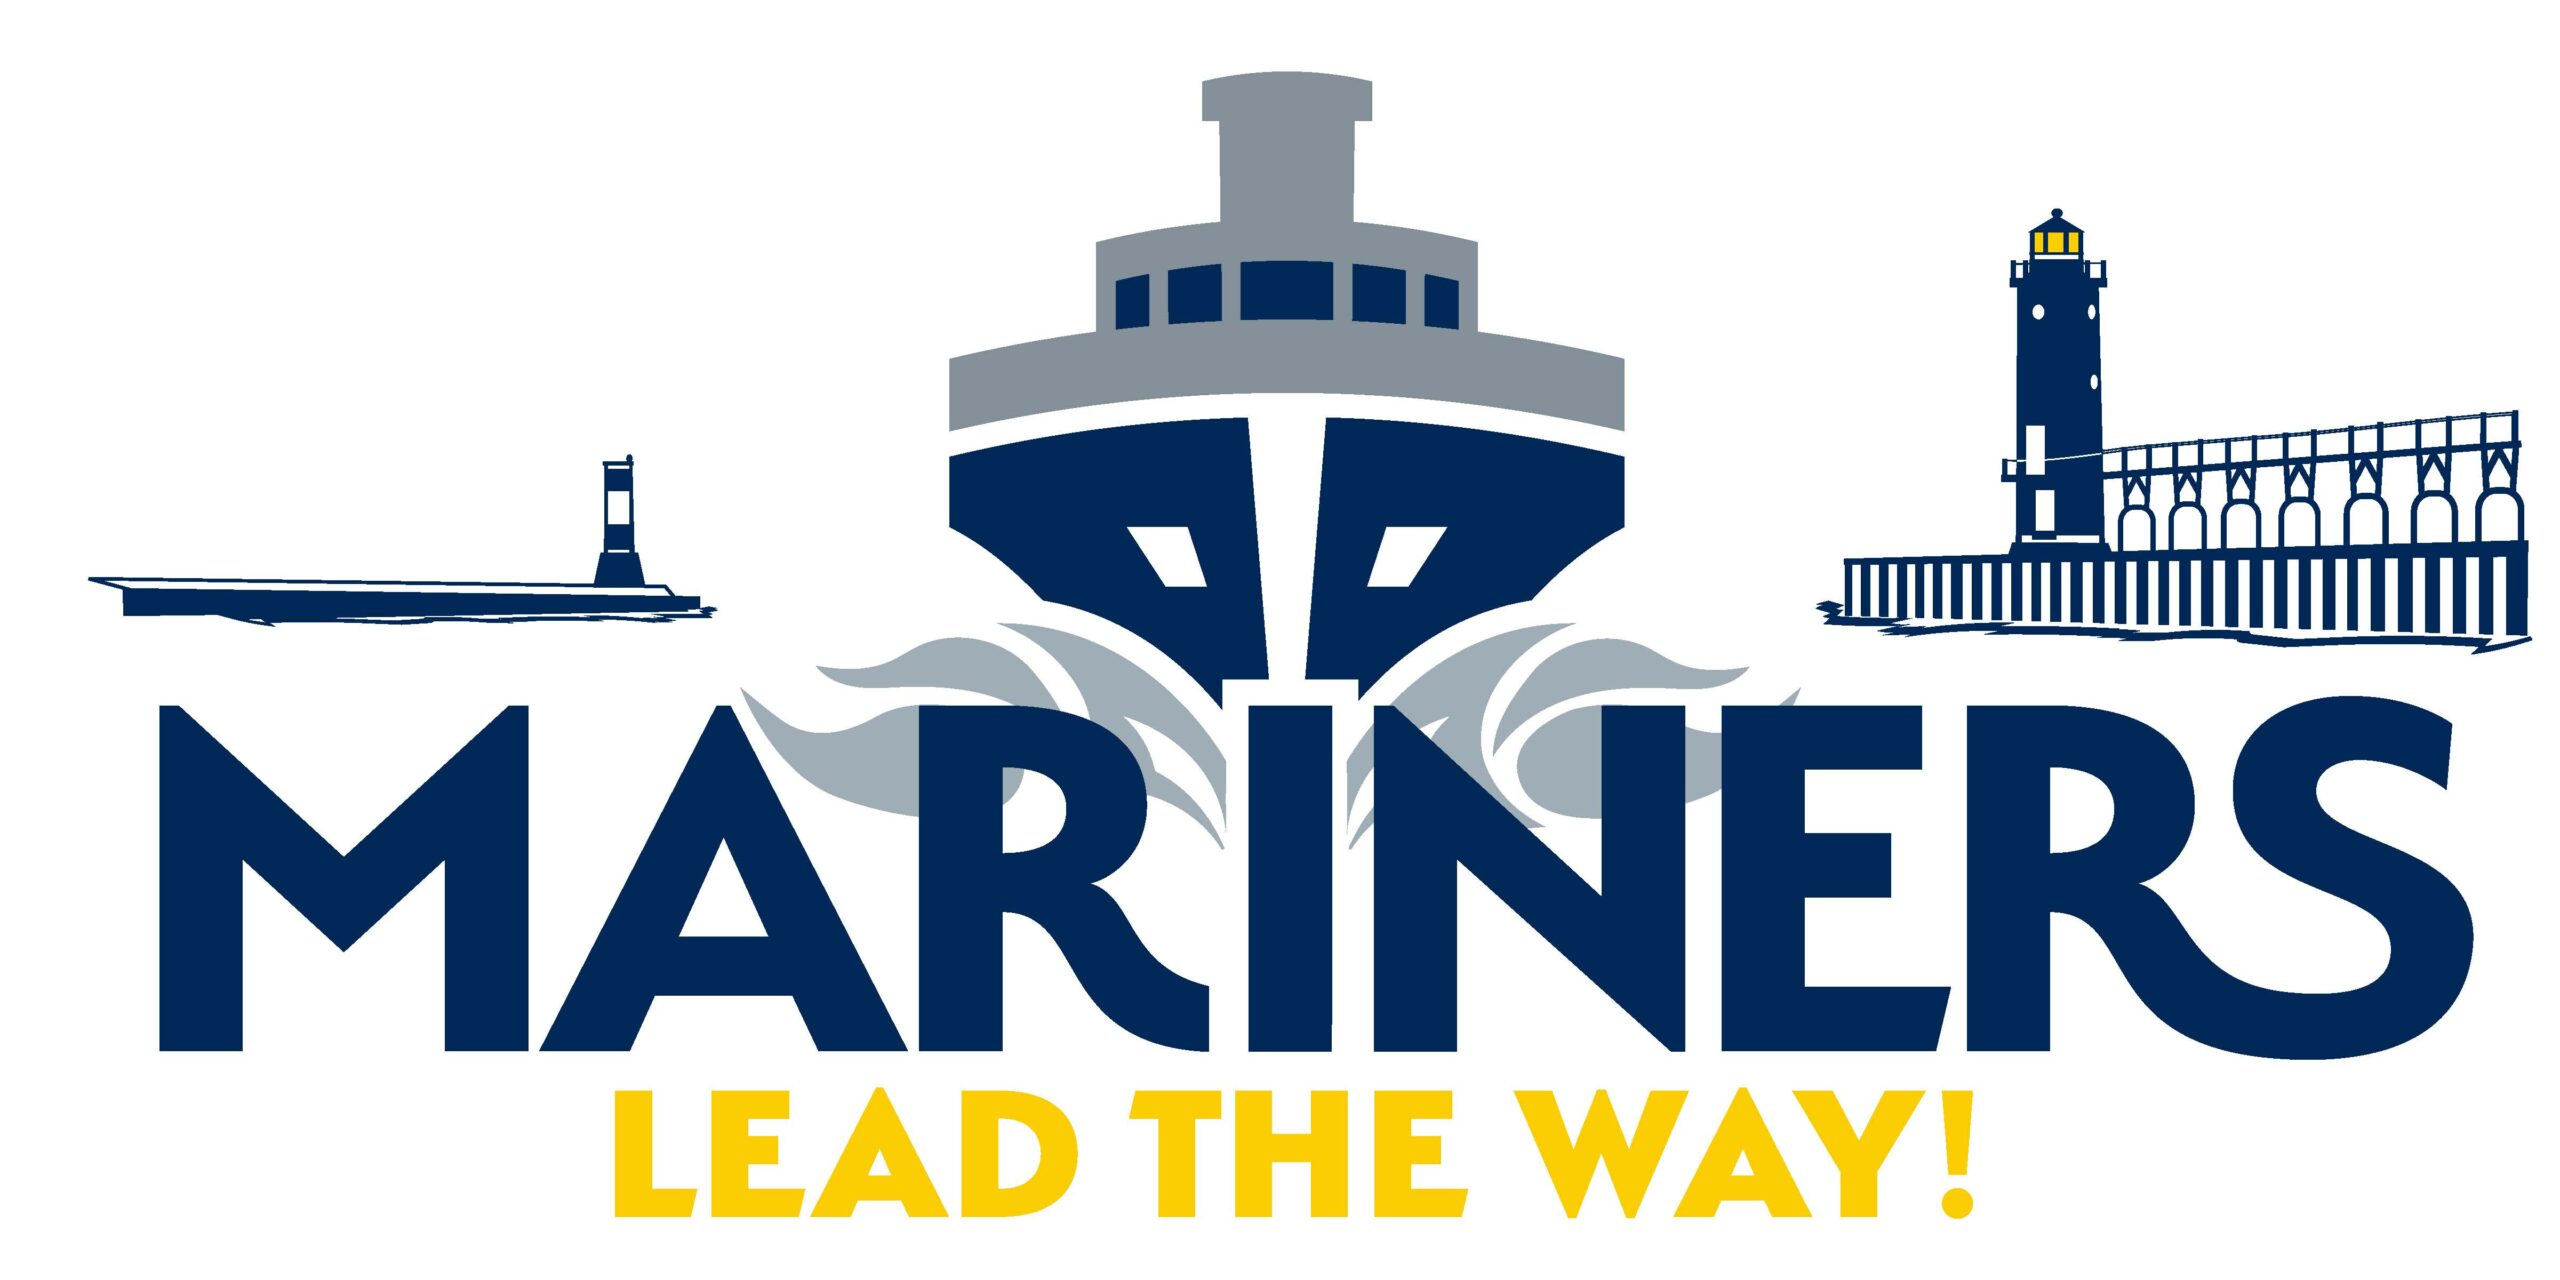 Mariners logo with pier heads